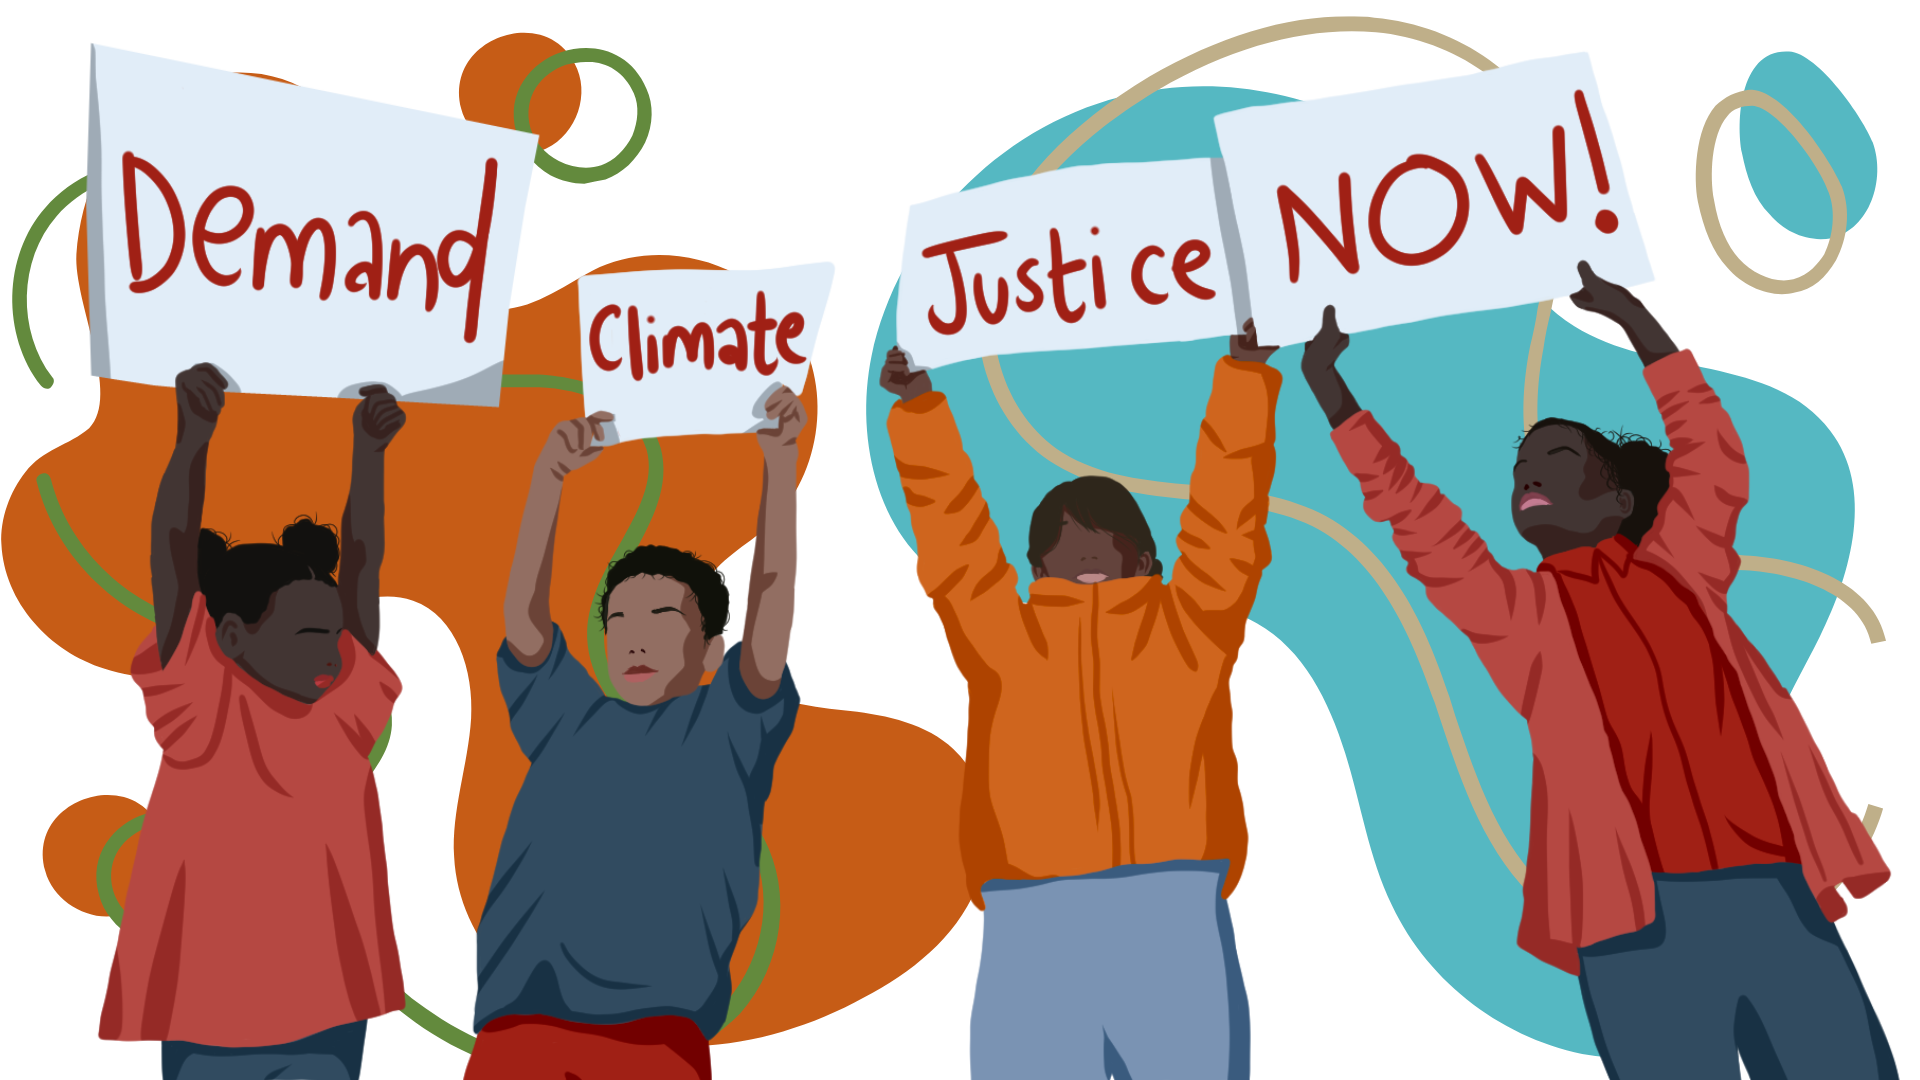 Four people, holding up sinds that form the words: 'Demand Climate Justice Now!'